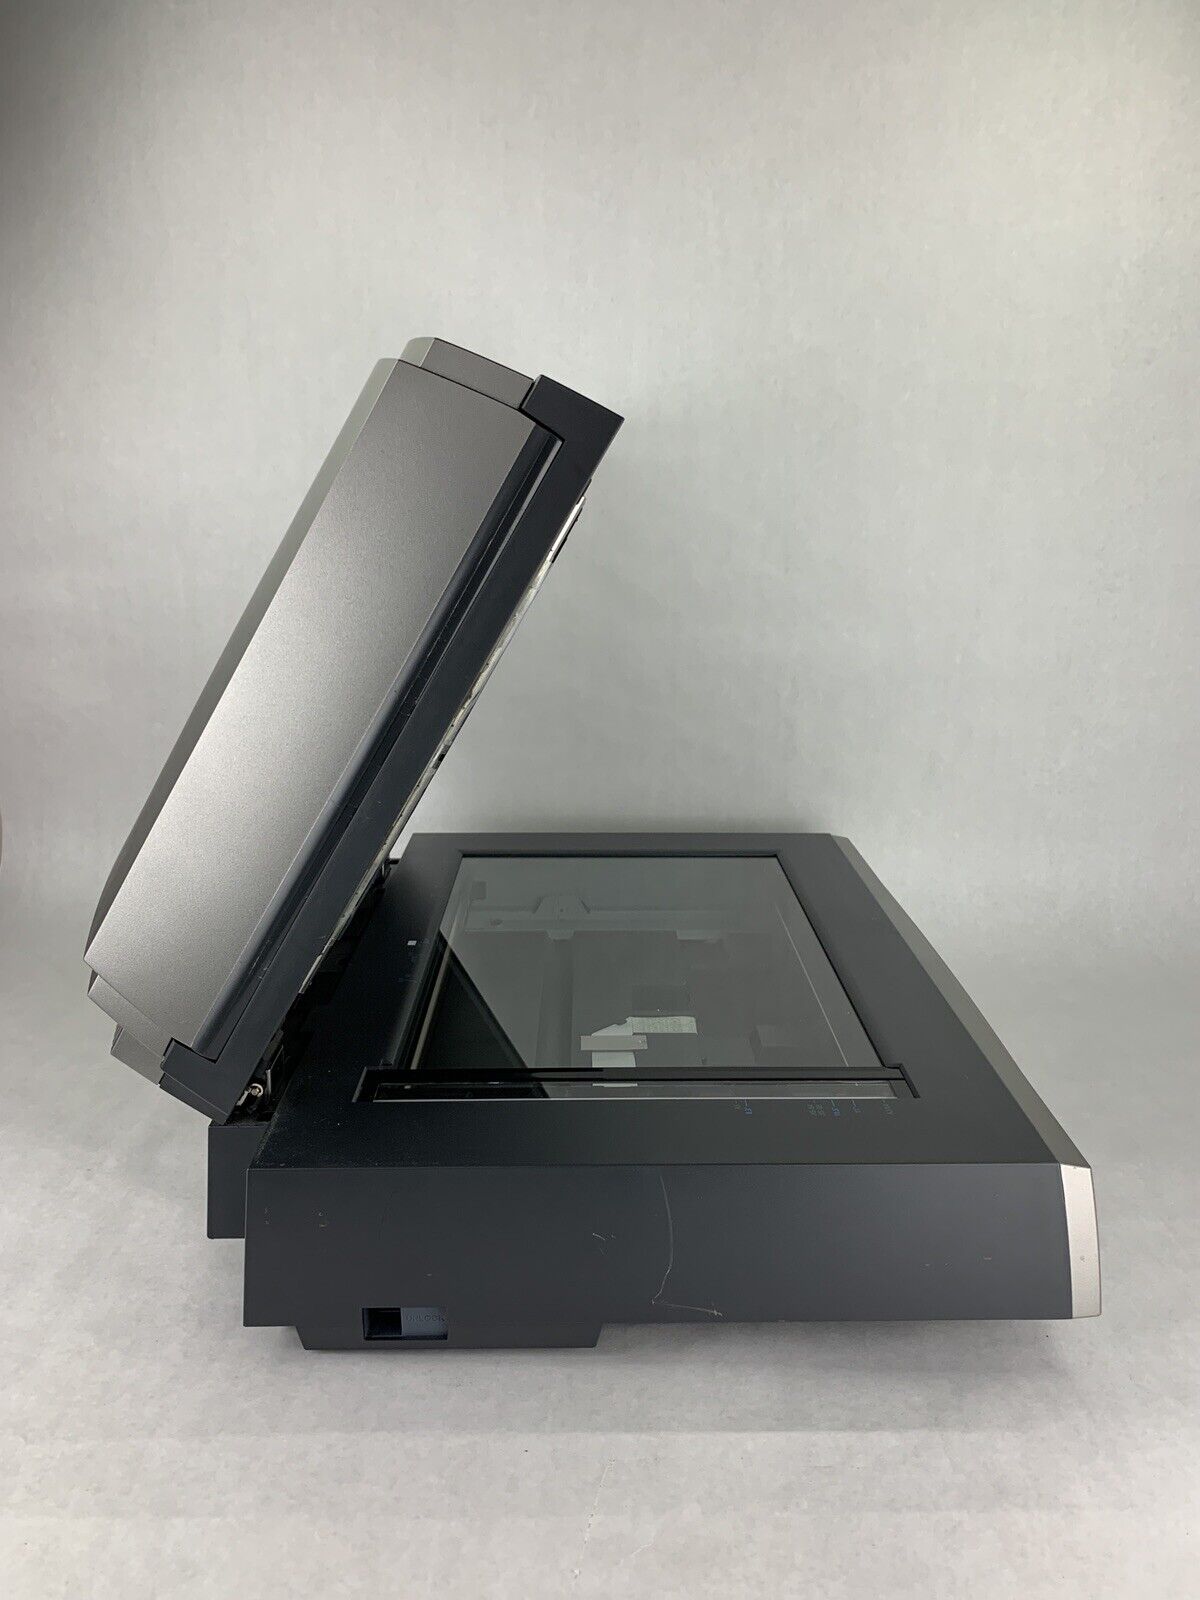 Xerox DocuMate 752 Professional Scanner Untested For Parts an Repair